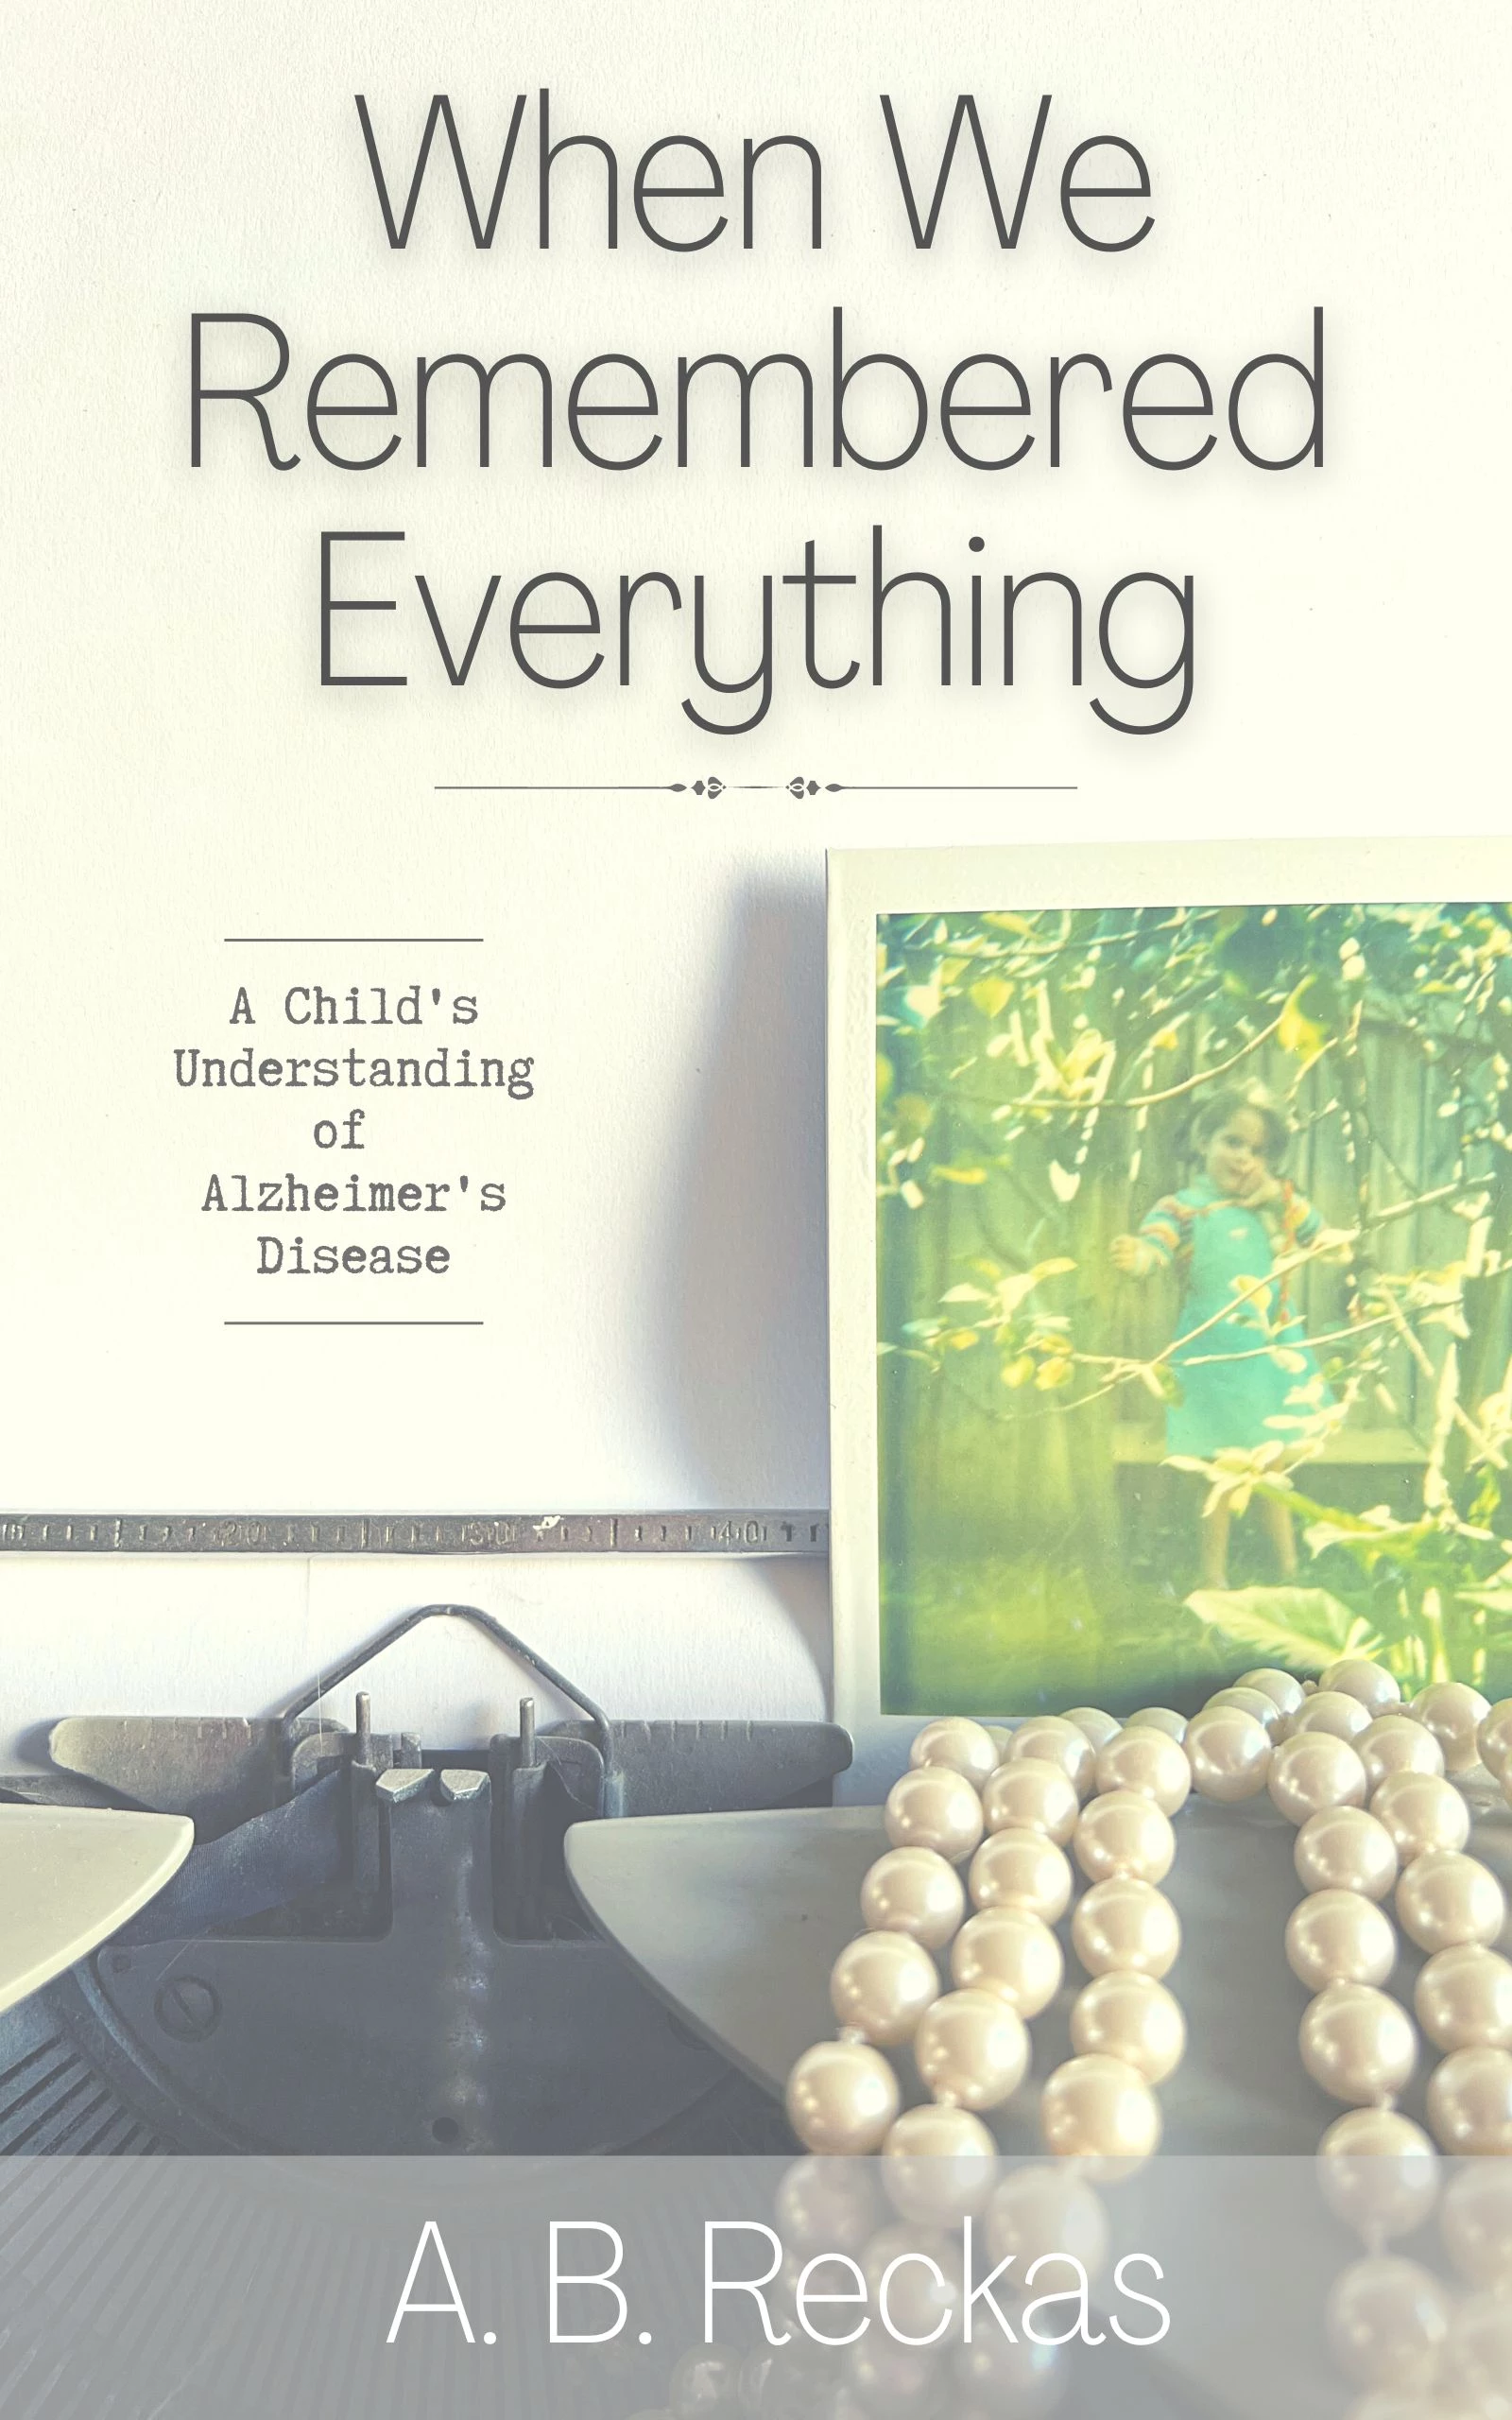 When We Remembered Everything: A Child’s Understanding of Alzheimer’s Disease